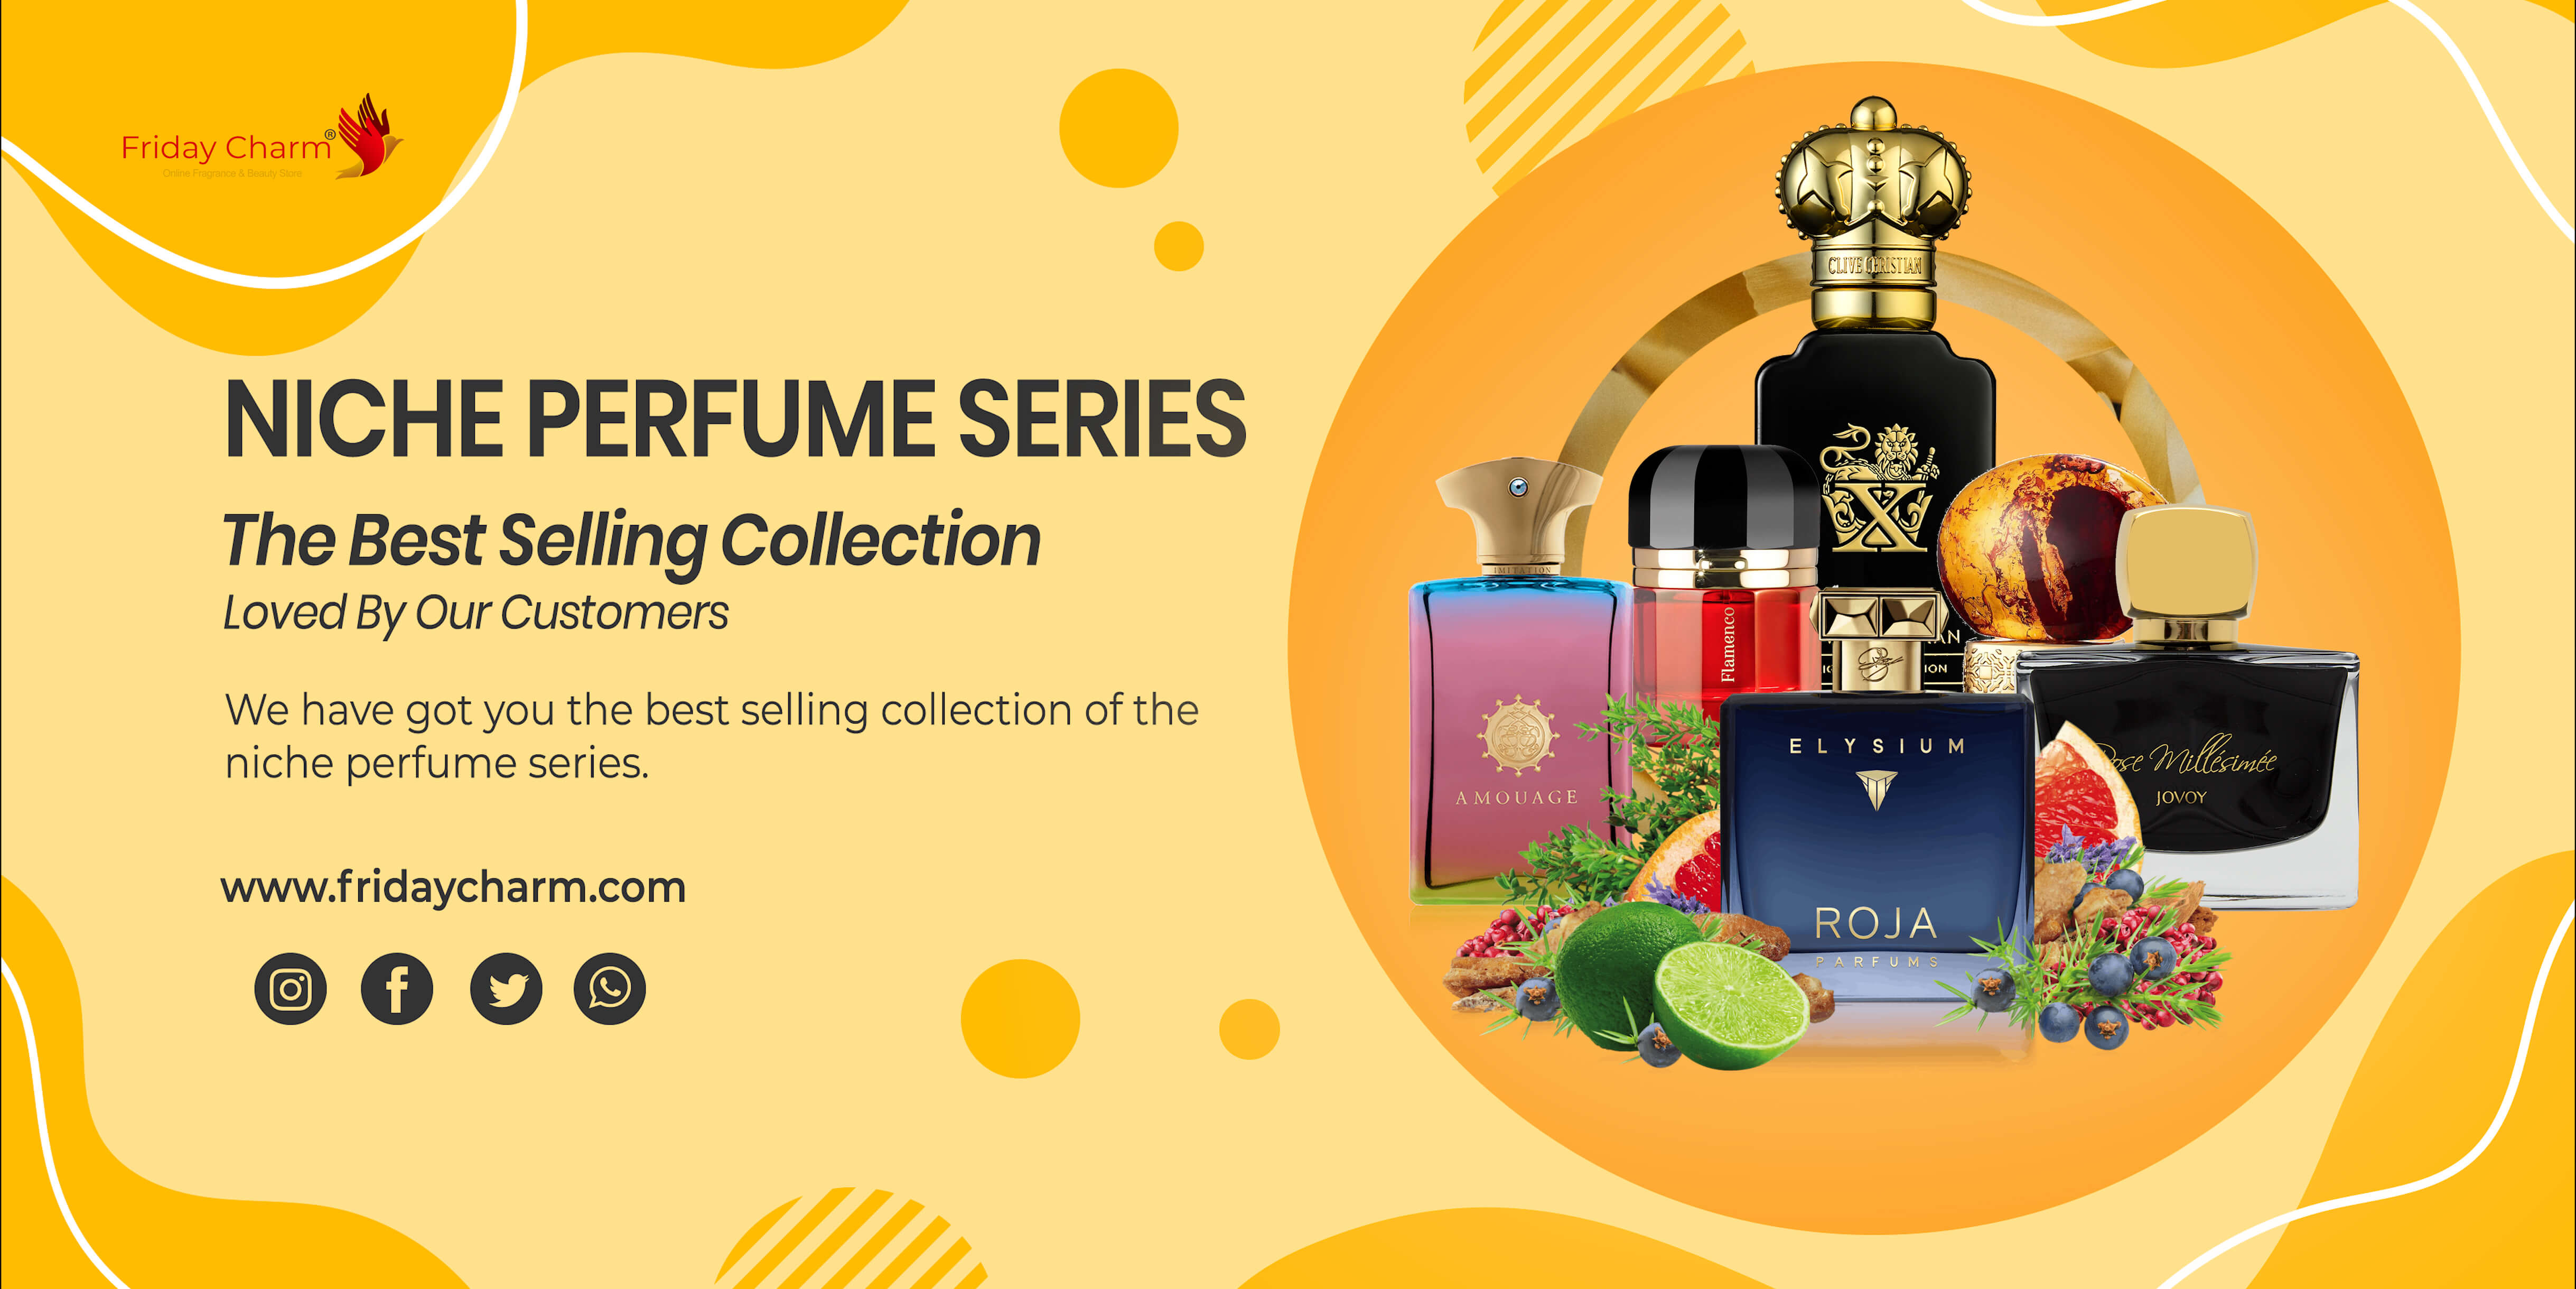 Loved By Our Customers - The Best Selling Collection (Niche Perfume Series)